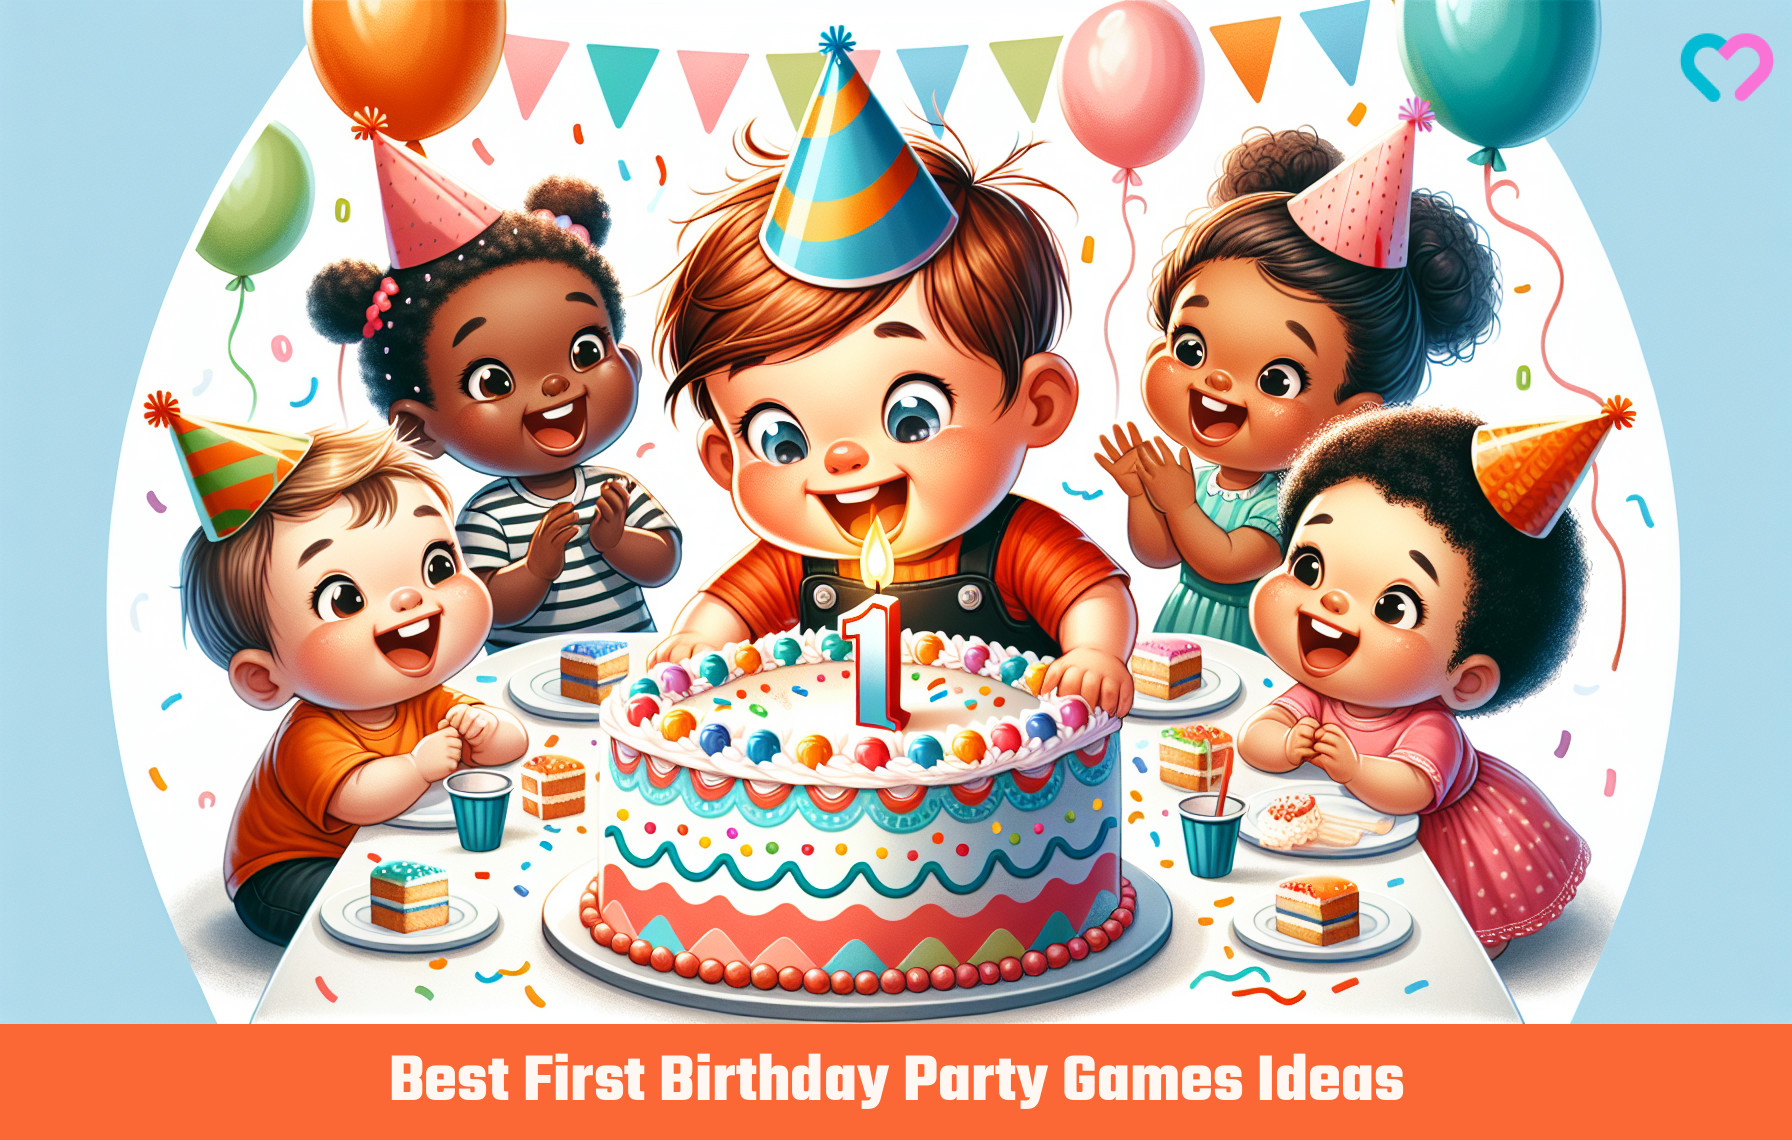 First Birthday Party Games Ideas_illustration